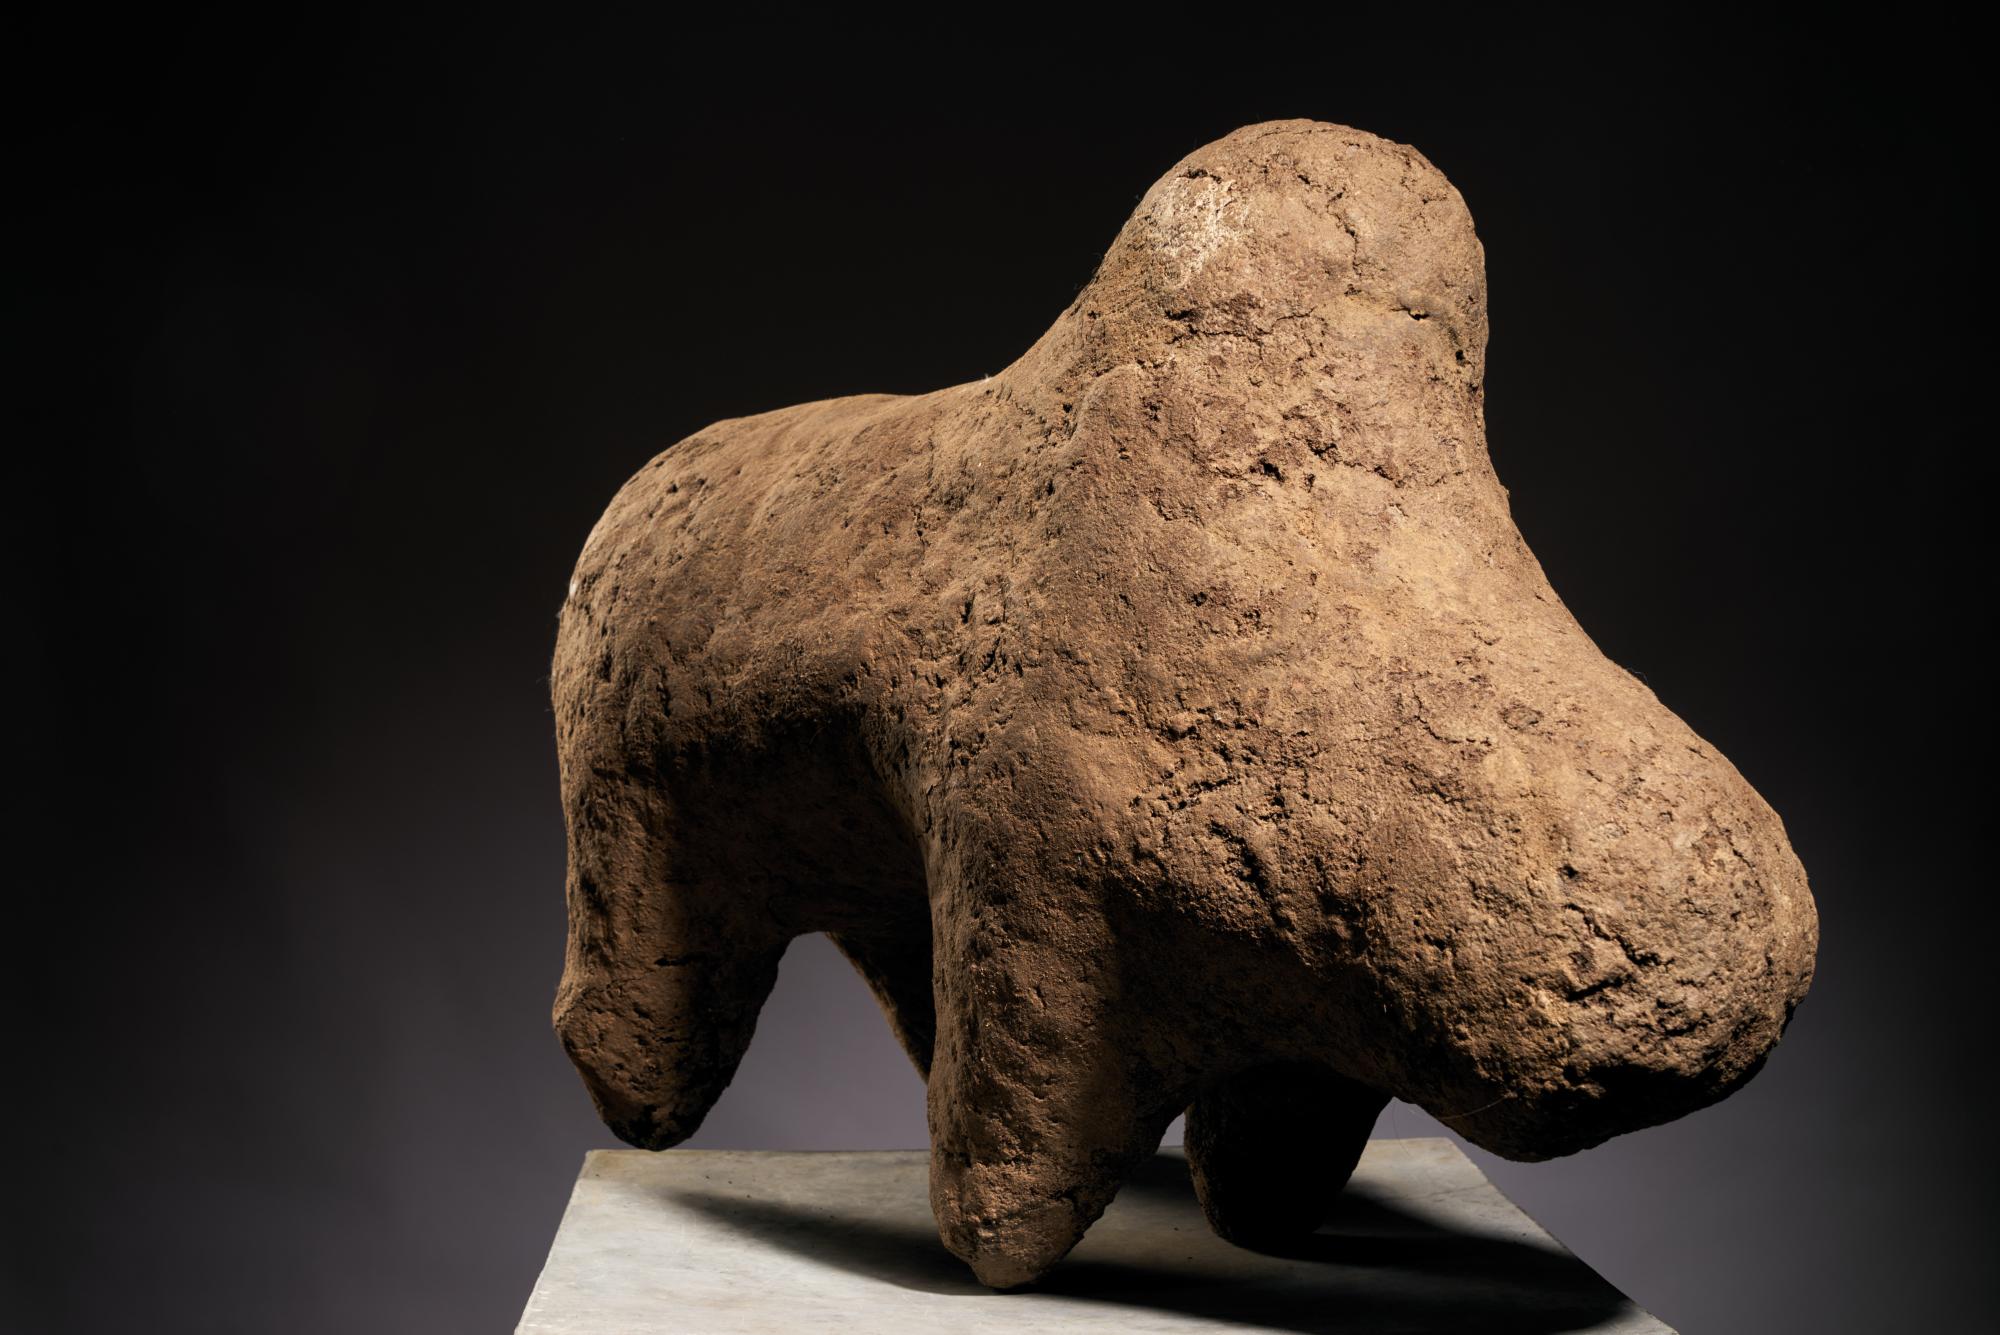 Tribal/Ethnographic: Boli Power Object, Bamana People, Mali 57cm high. A rough, cracked surface